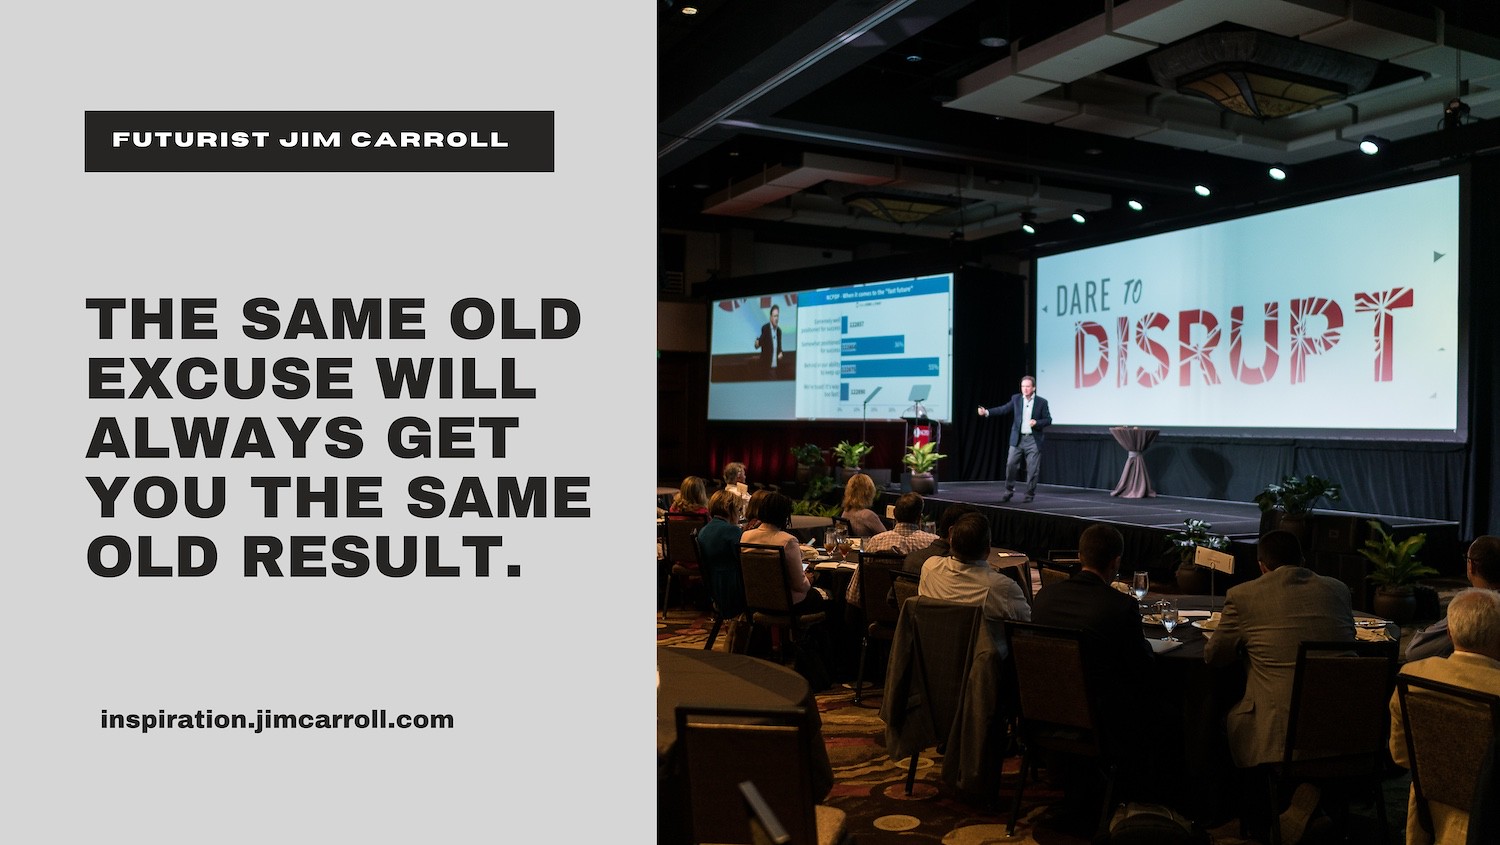 Sam"The same old excuse will always get you the same old result." - Futurist Jim Carroll